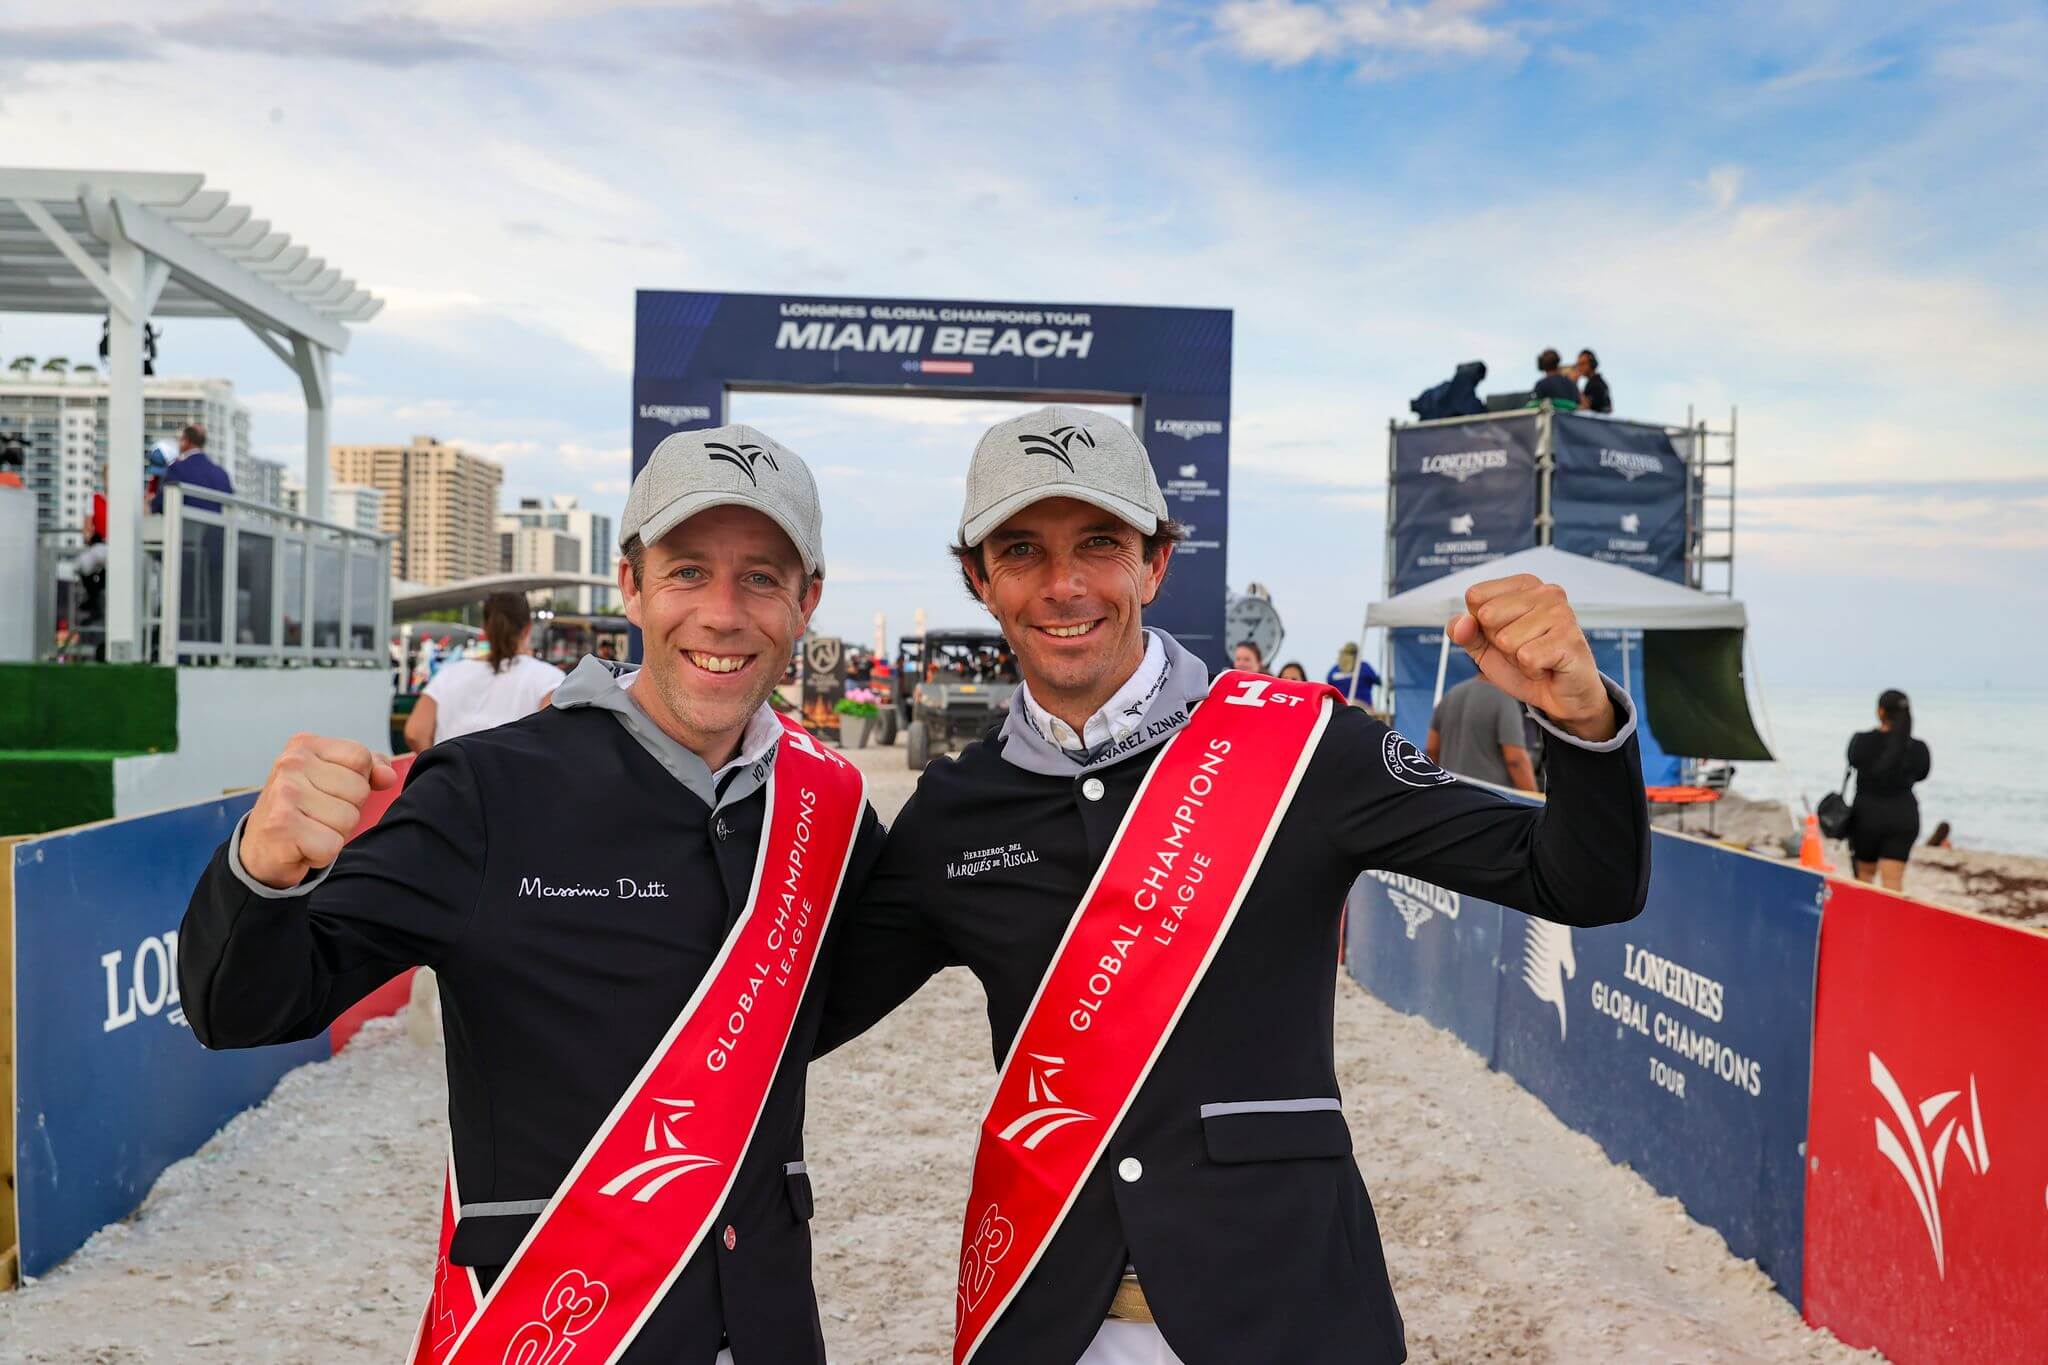 Madrid In Motion Make Waves in GCL Miami Beach